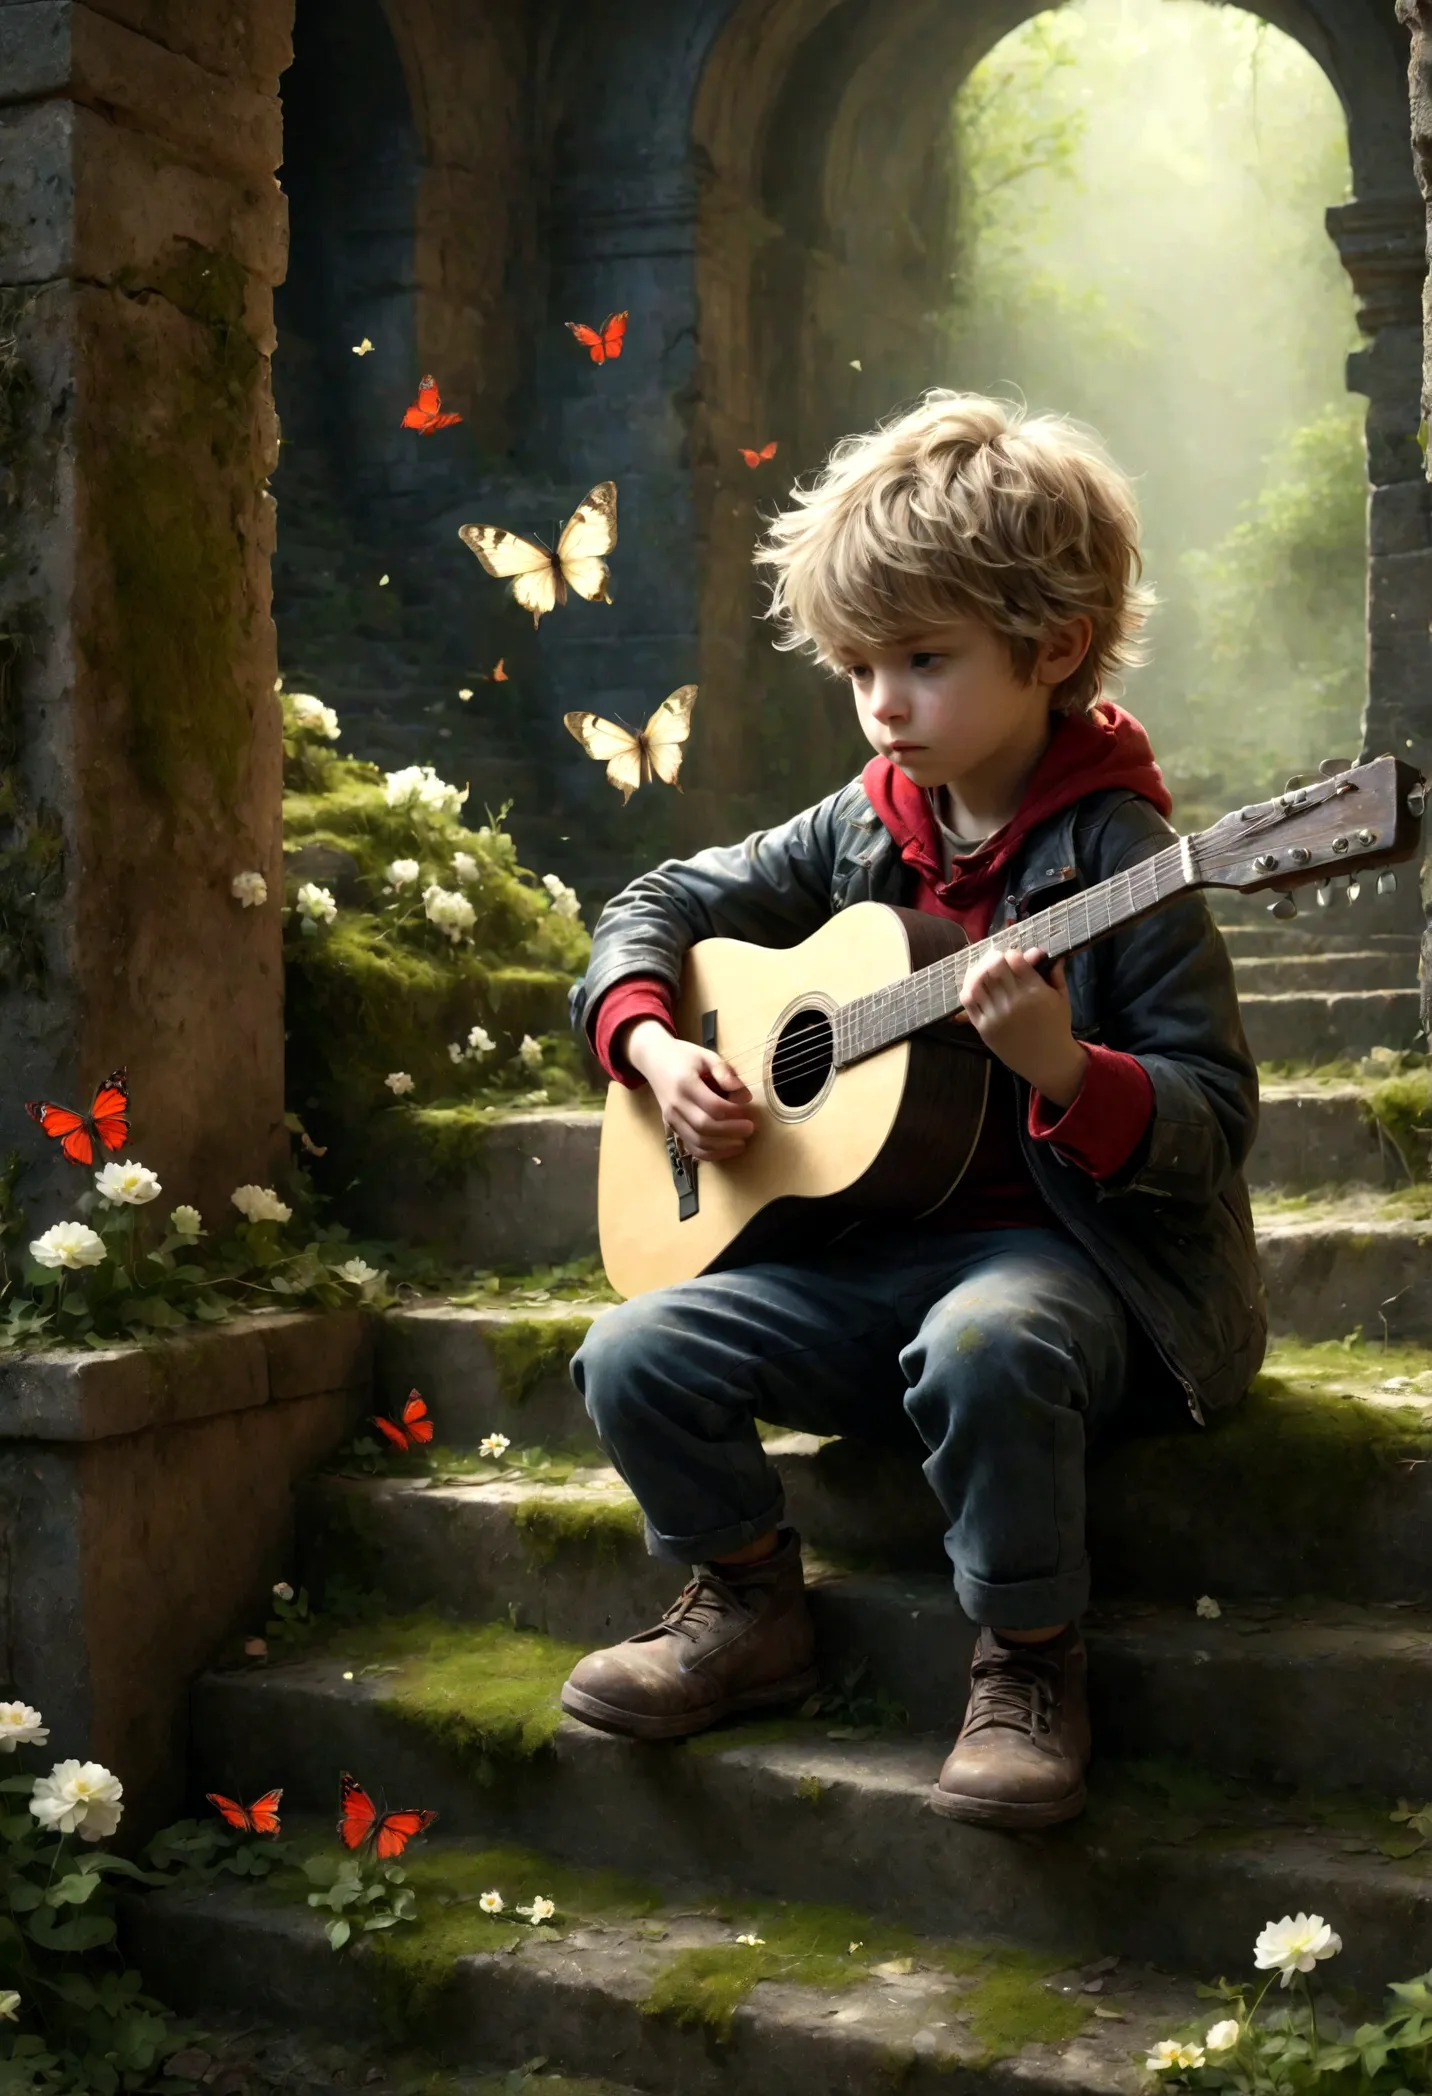 cannon fire，Little boy playing guitar in ruins, depressed, desolate, moss covered, Dilapidated, dirty, (best quality,4k,8K,High ...